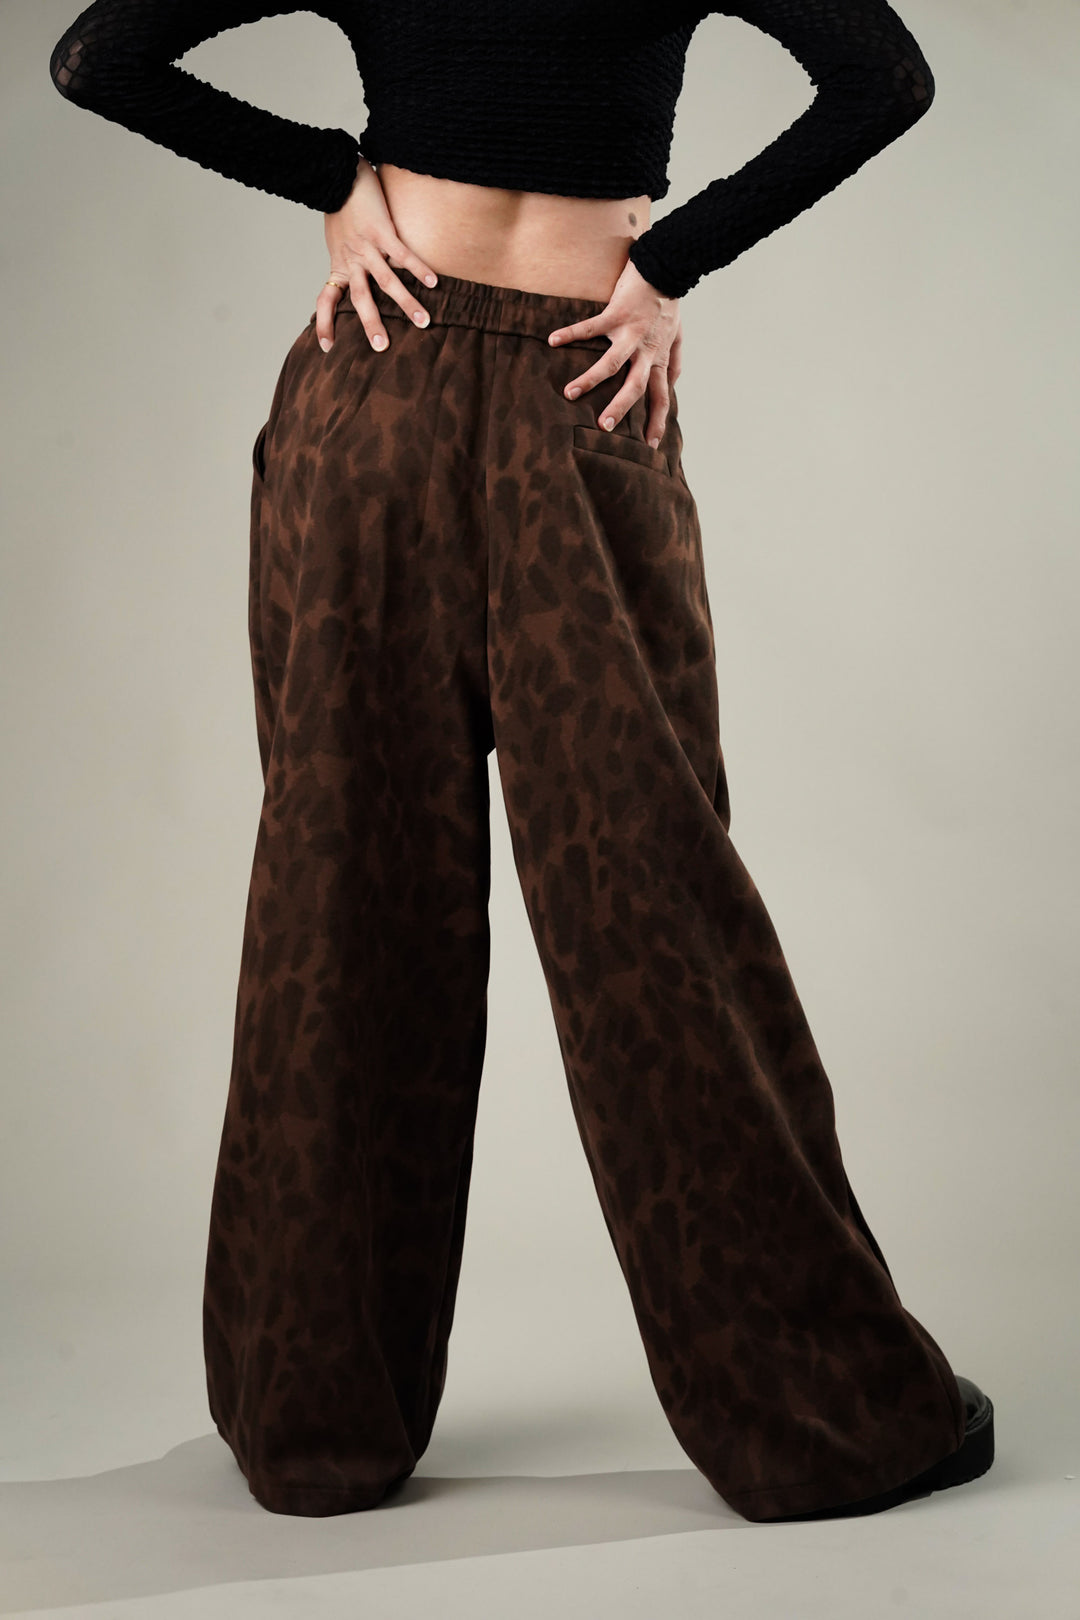 Stylish Leopard Print Pants for Casual Wear